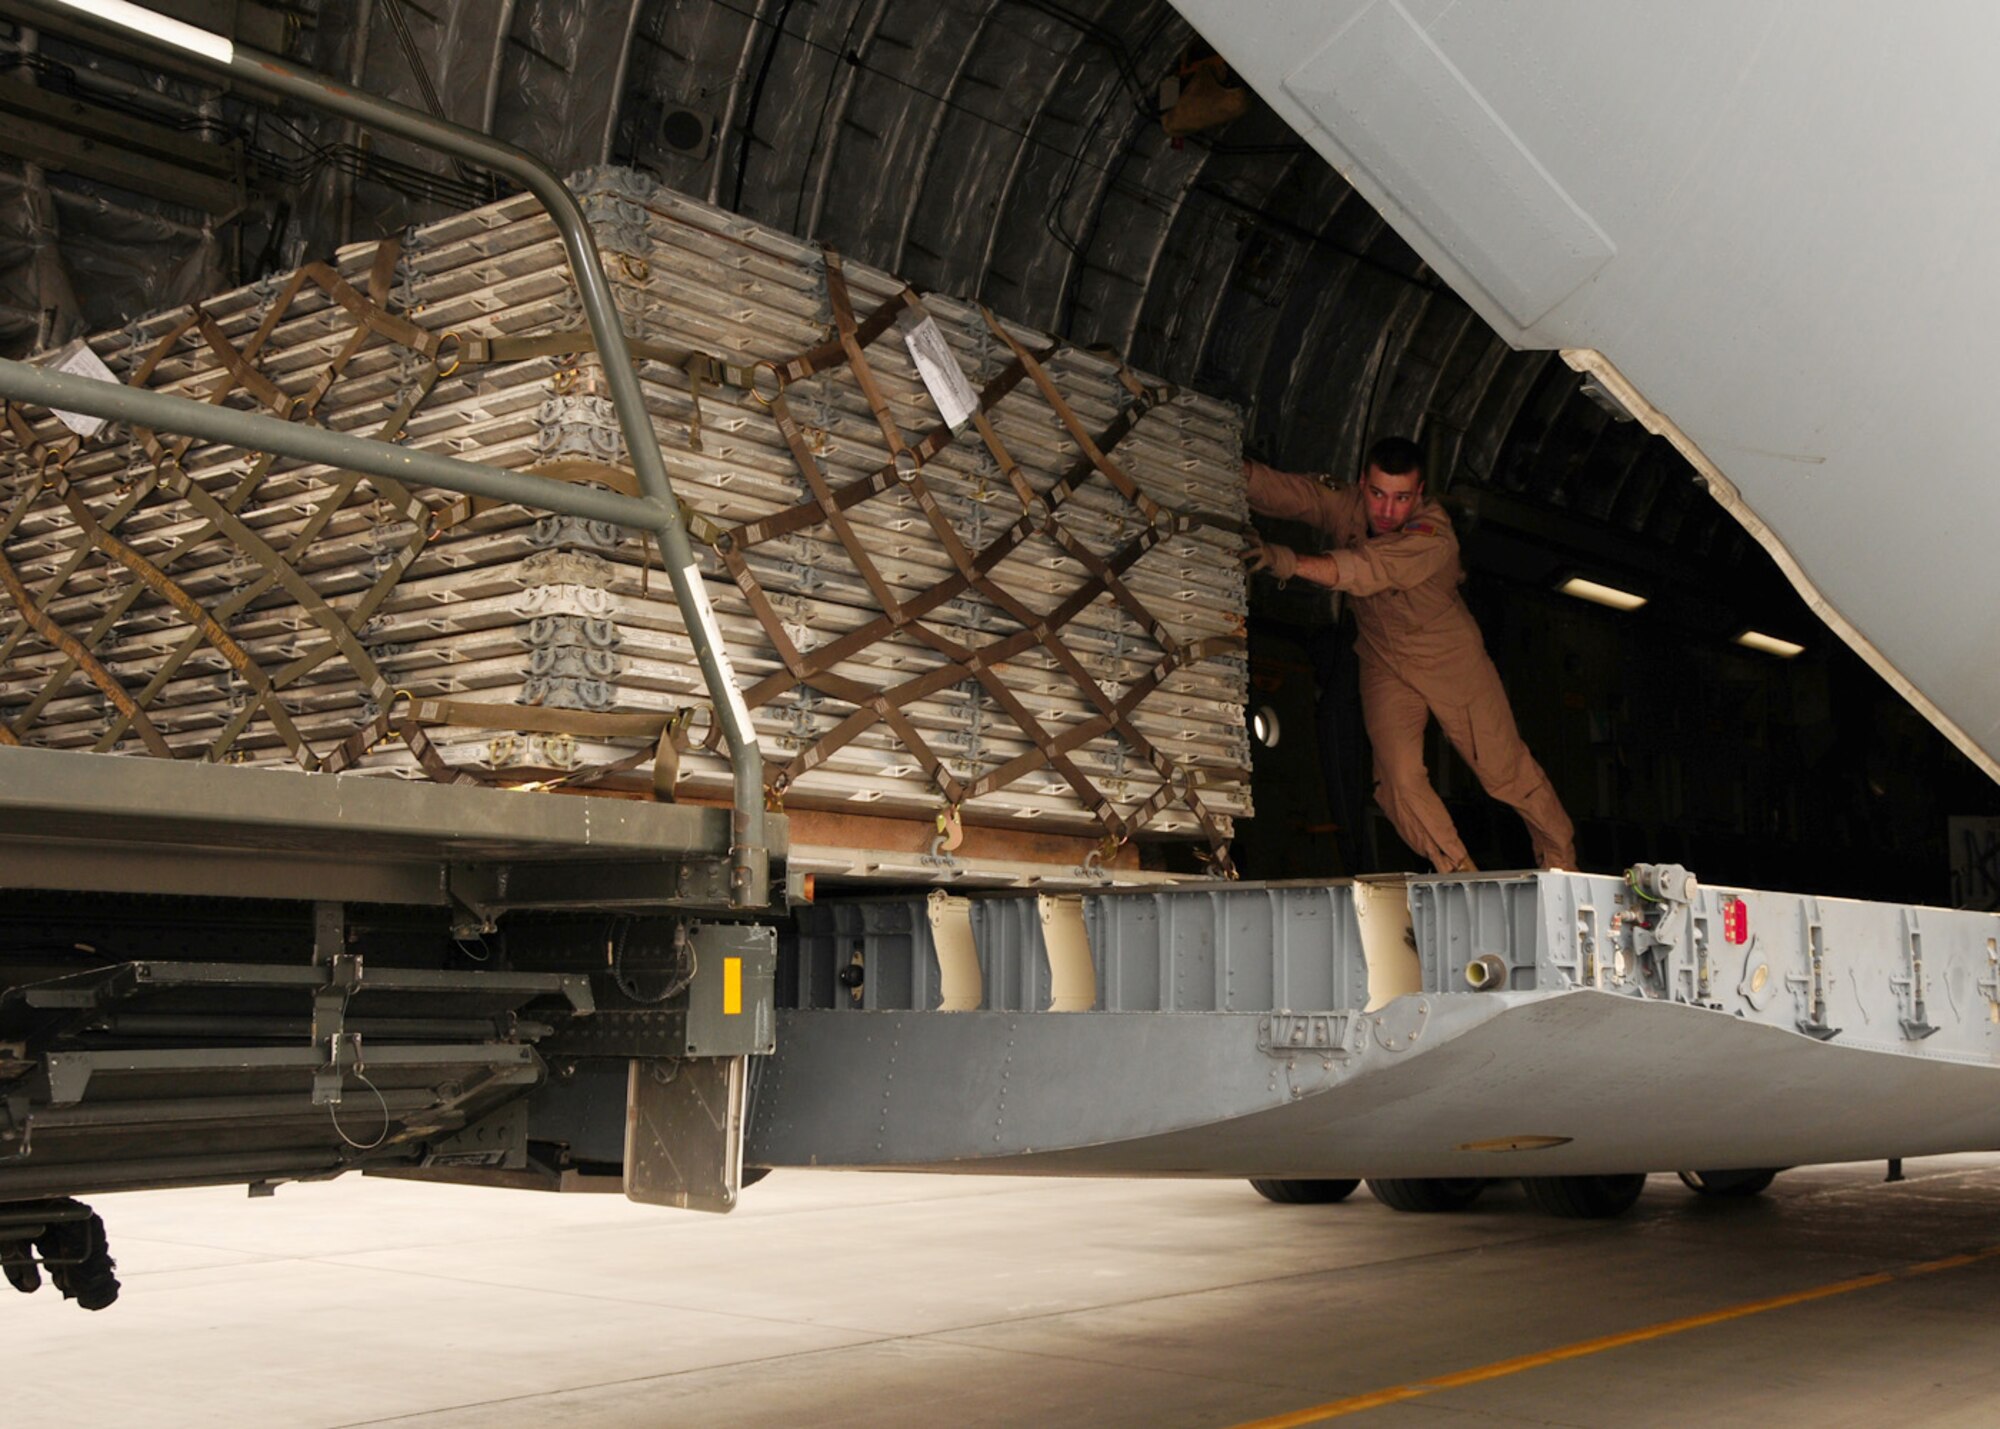 SOUTHWEST ASIA -- Staff Sgt. Dan Carlisle, 816th Expeditionary Airlift Squadron, pushes a pallet onto a 60K aircraft cargo loader during an off-load at an air base in Southwest Asia, May 6. A C-17 Globemaster can carry up to 170,900 pounds of cargo distributed at max over 18 standardized pallets or a mix of palletized cargo and vehicles. Sergeant Carlisle is currently deployed from Dover Air Force Base, Del. and is originally from Aberdeen, Wash. (U.S. Air Force photo/ Senior Airman Courtney Richardson)